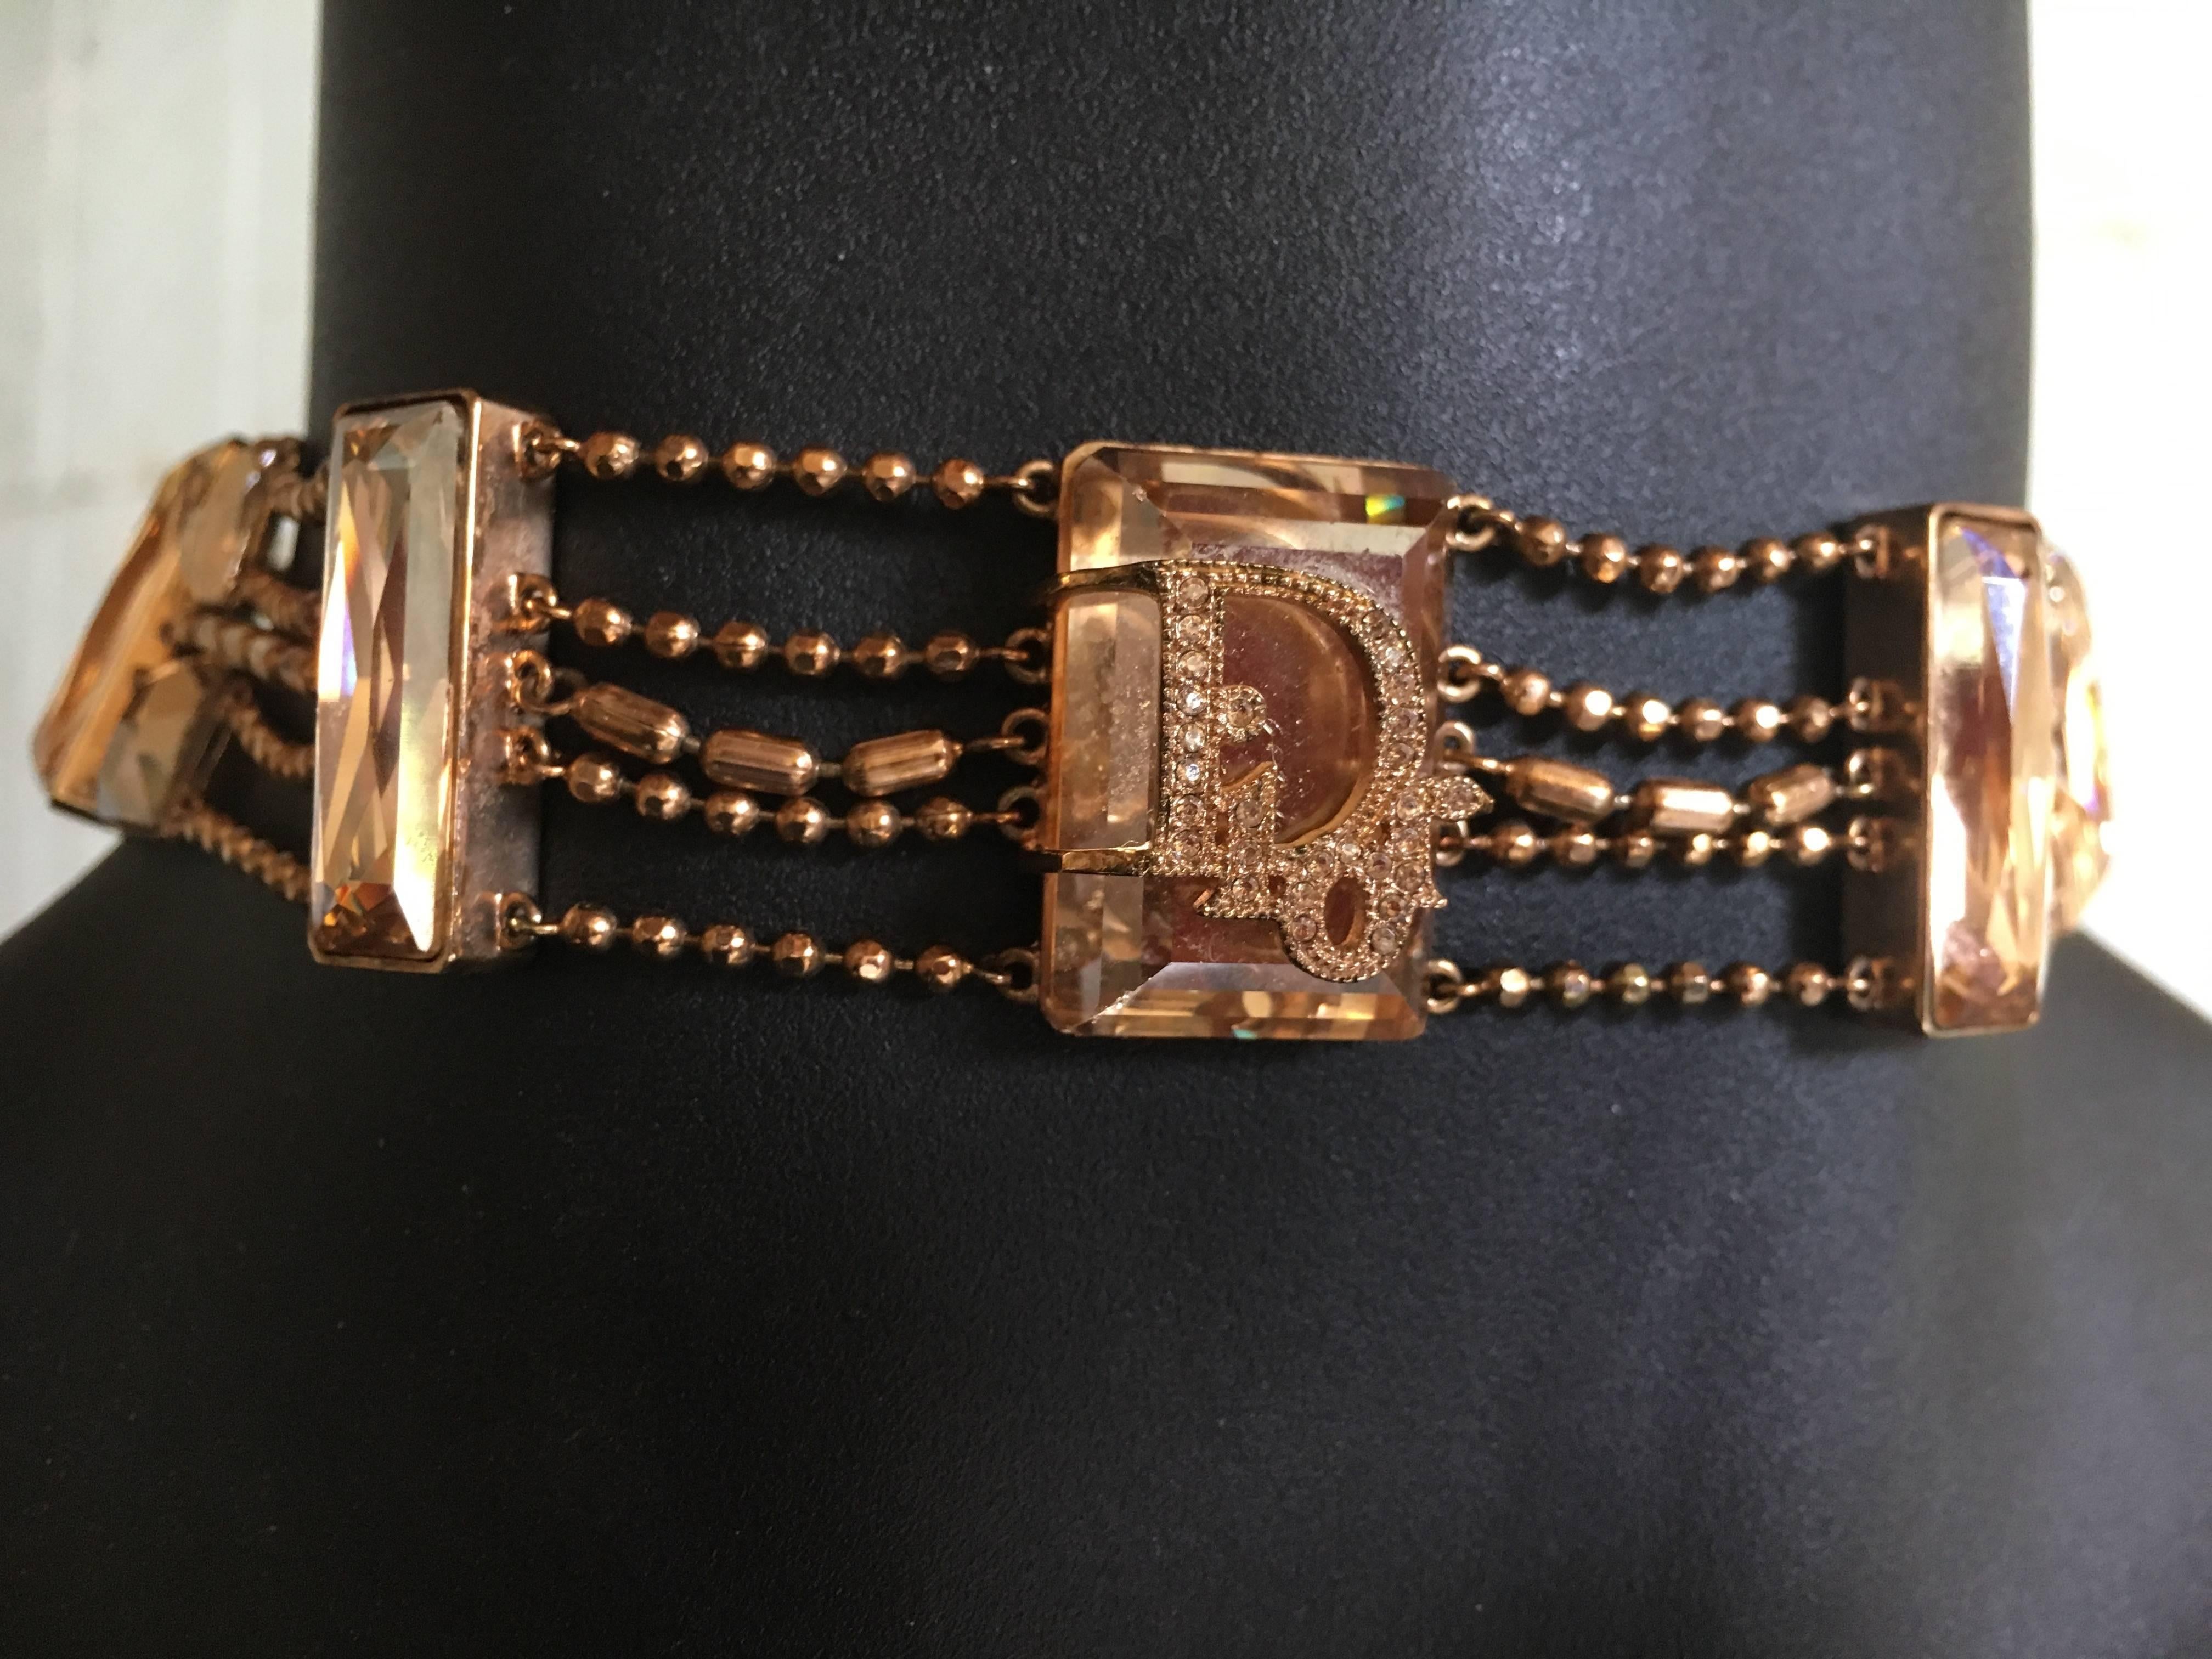 Christian Dior by Galliano Rare Crystal Chocker.
This is stunning, the color's so pretty.
The color of the metal is rose gold, and the crystals are a very pale gold tone called light topaz.
There is an extender chain.
Comes in original box.
1